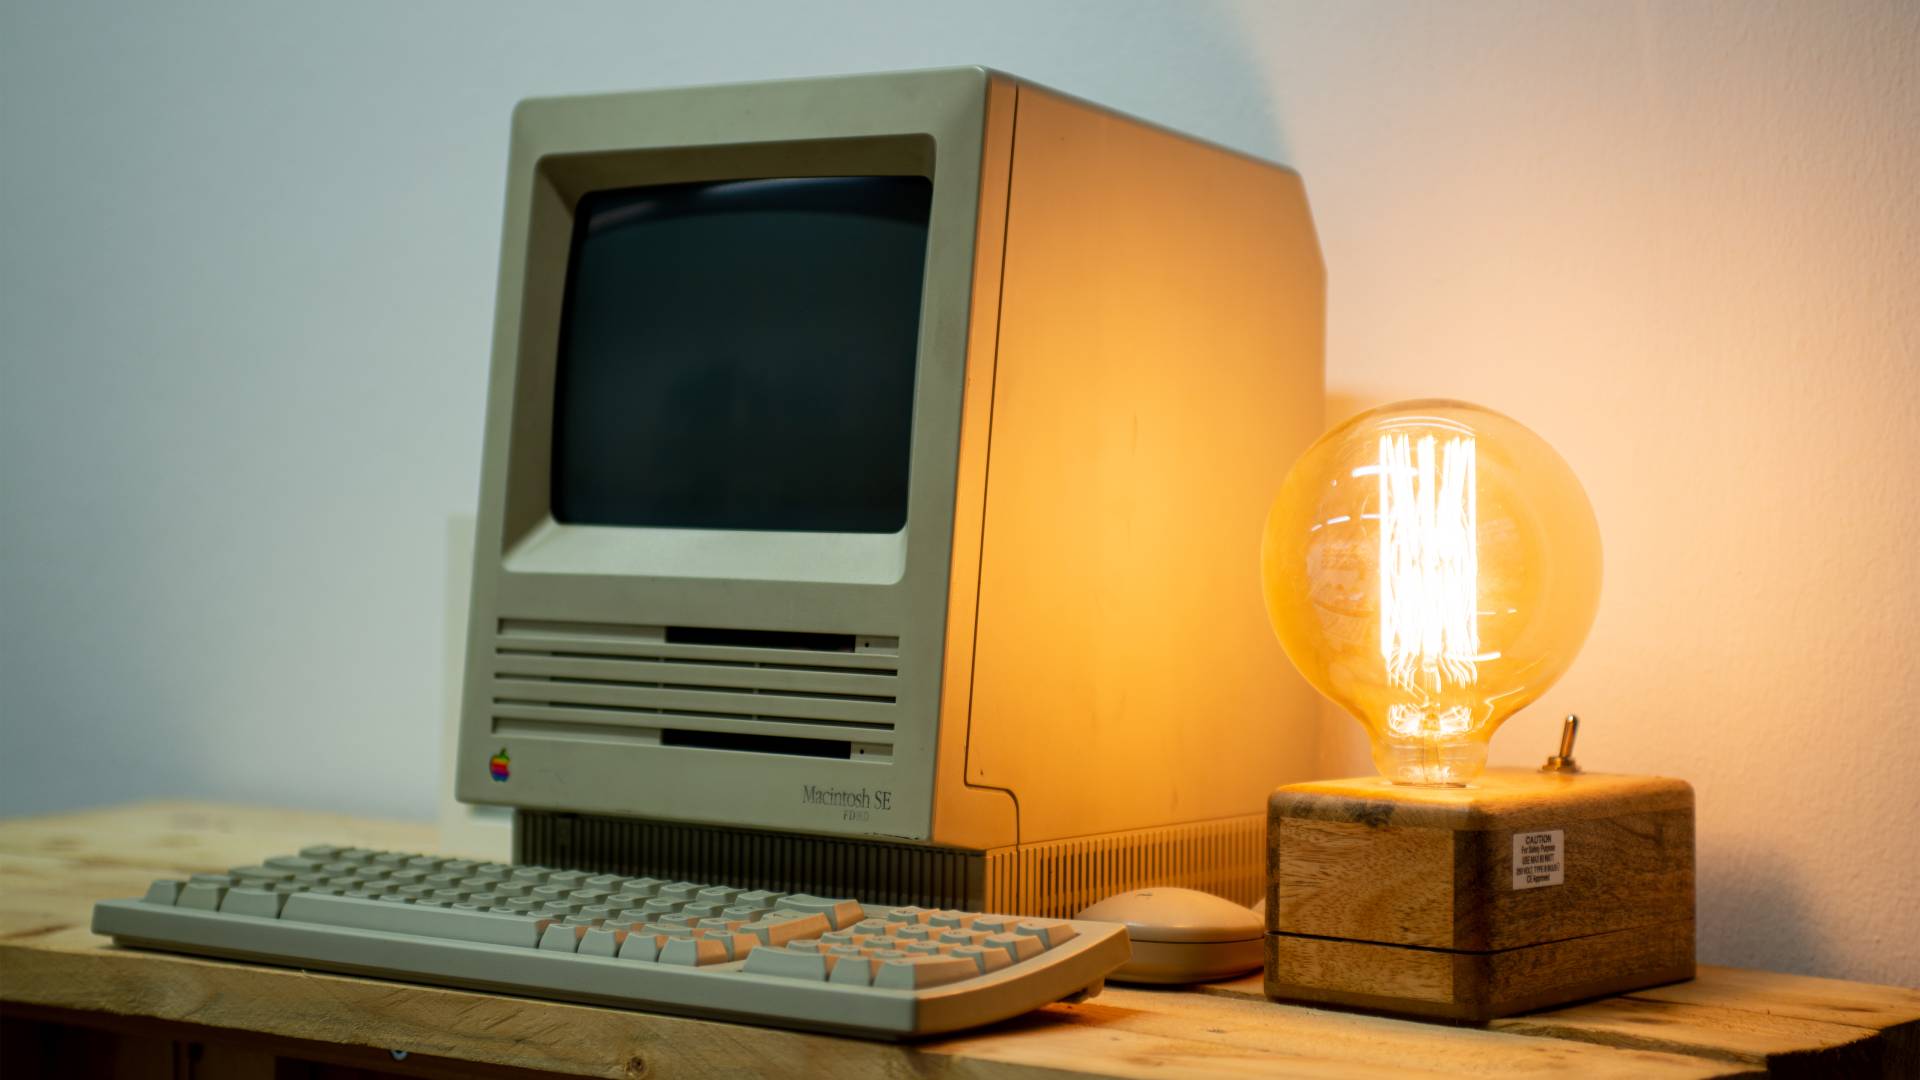 An old computer with a glowing light bulb